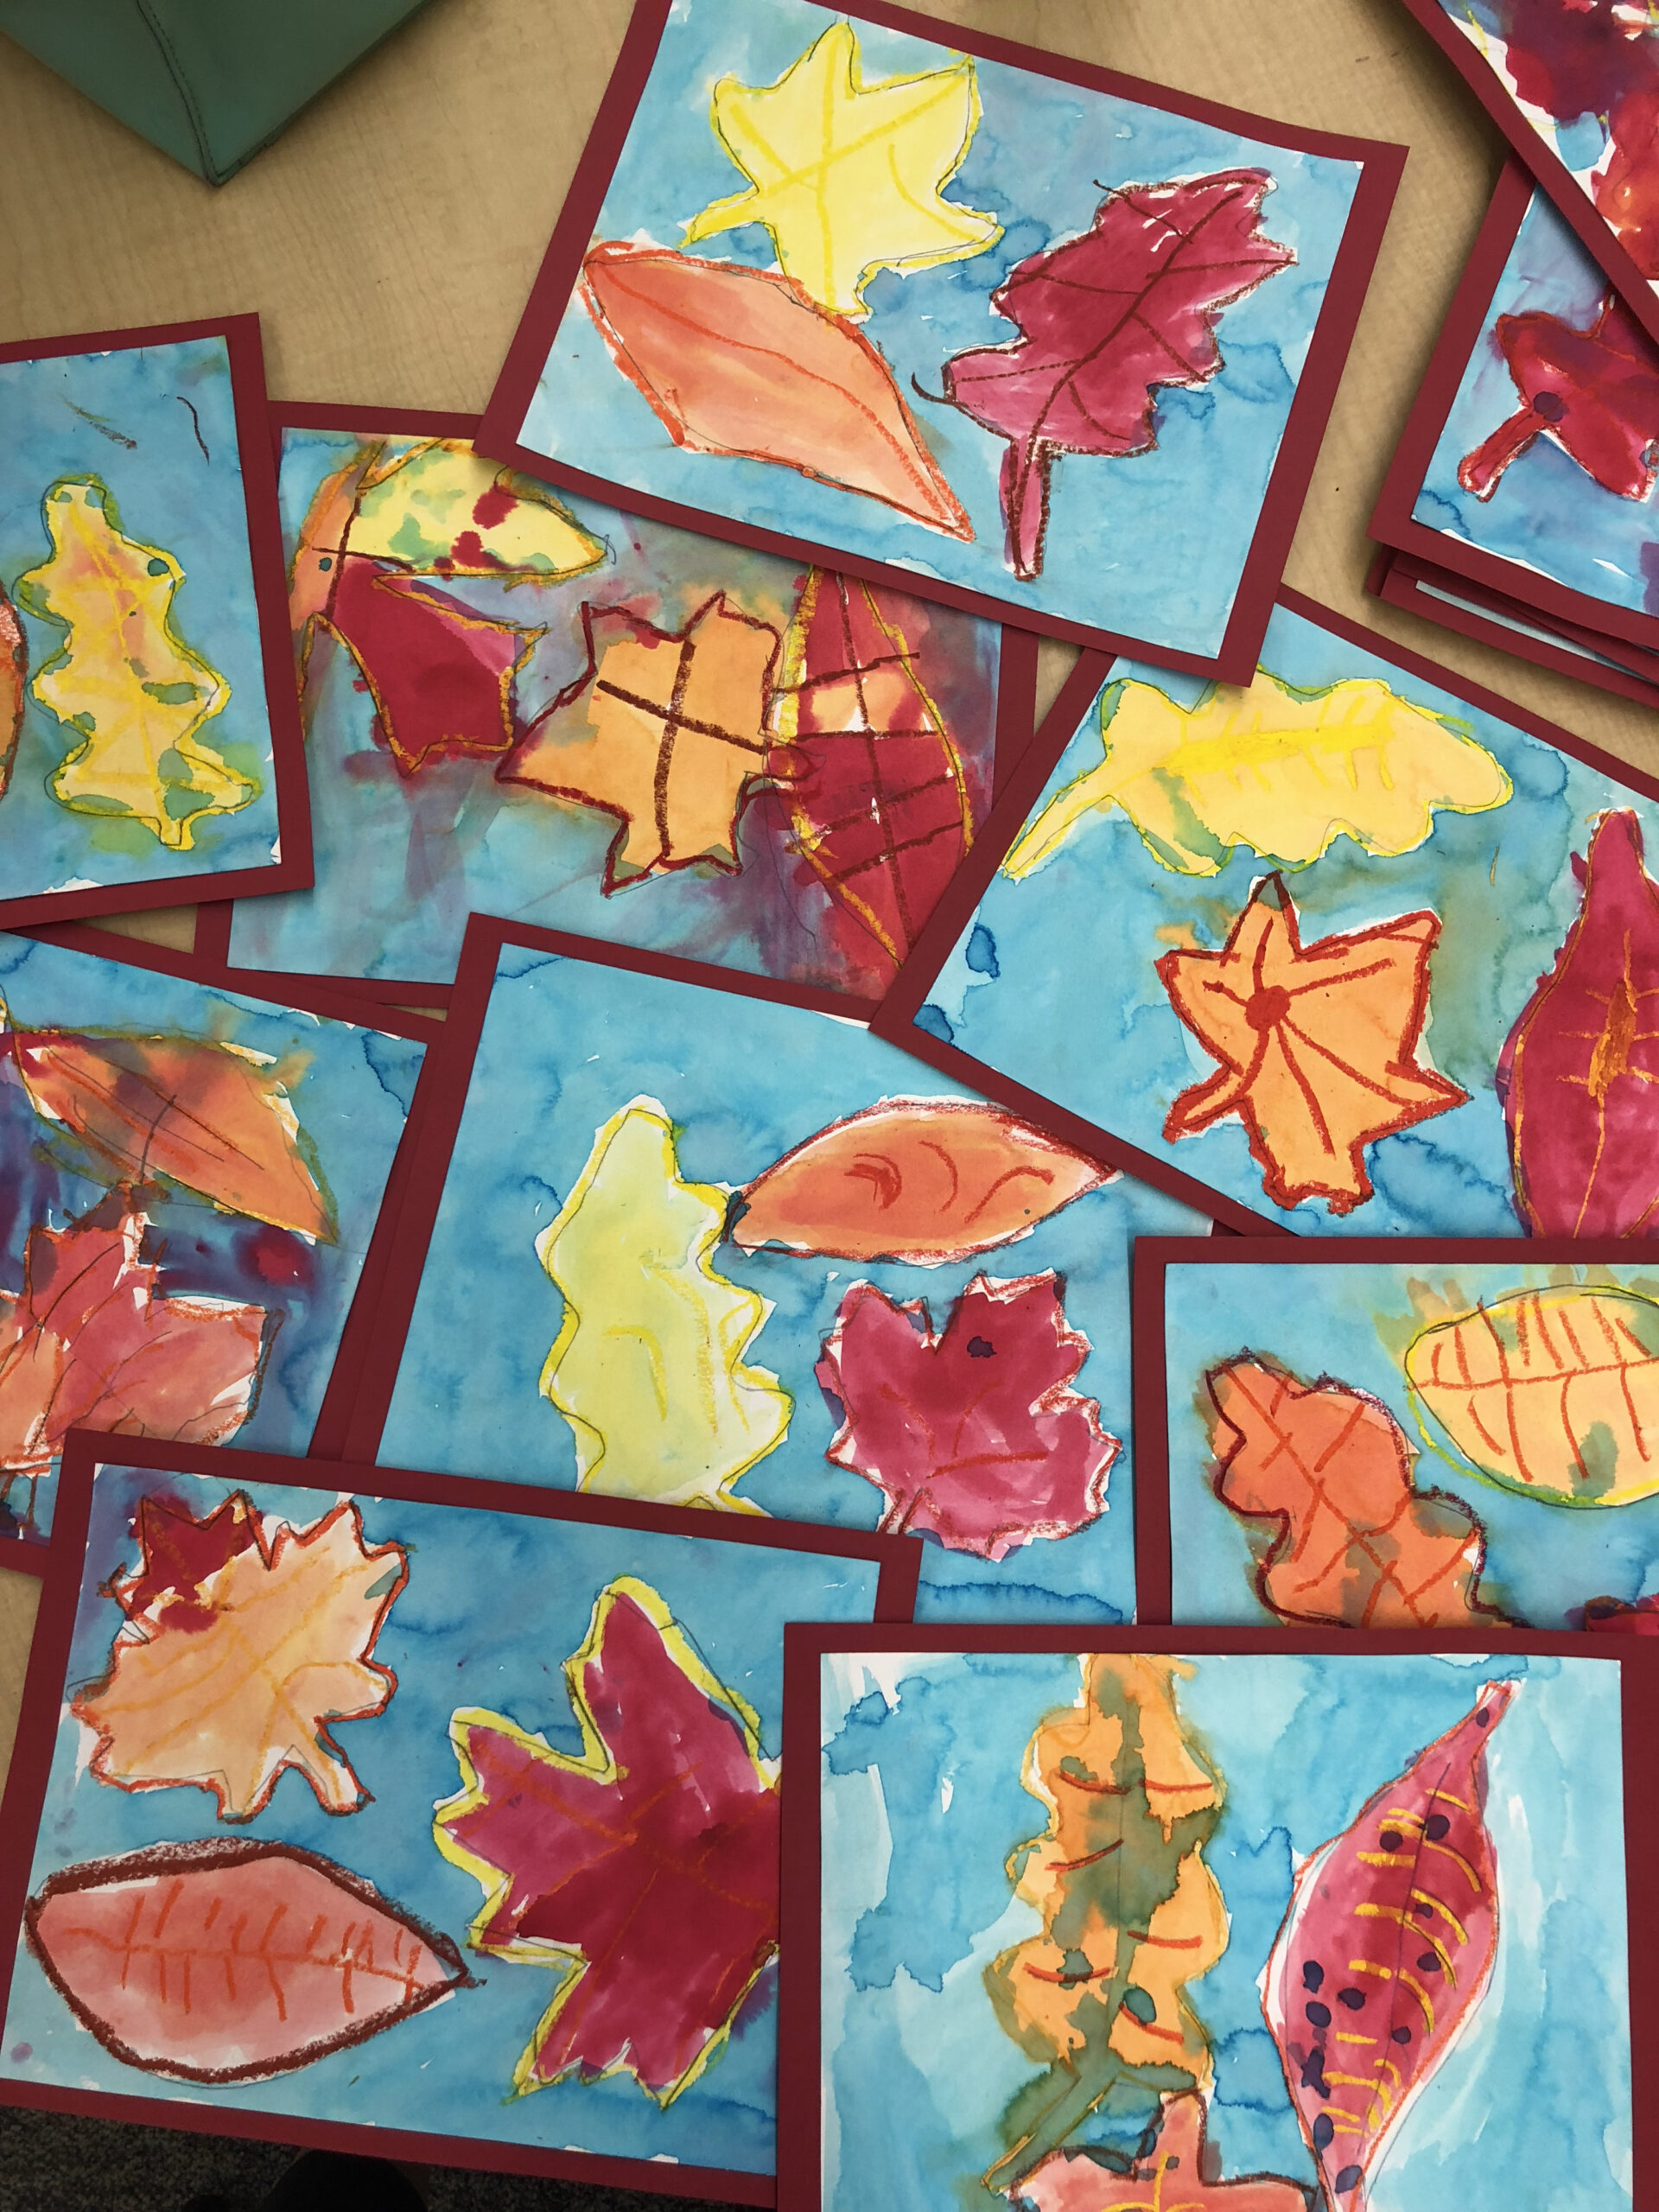 Falling Leaves: Creating ways to explore Autumn while learning about Parts of a Leaf and Warm Colors (Red, Orange, Yellow)